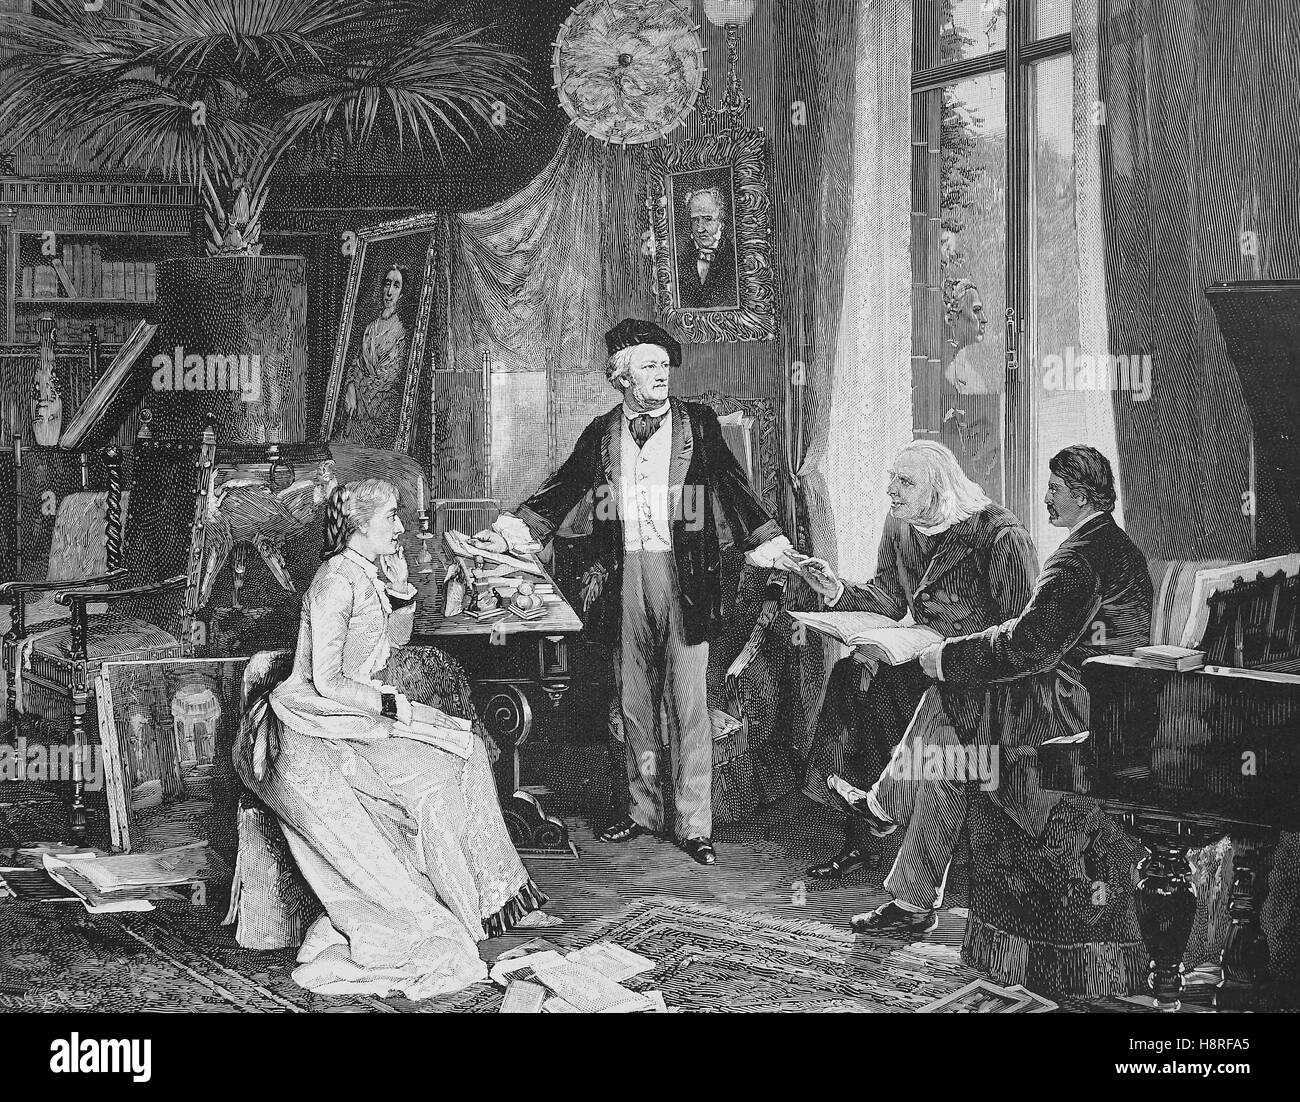 Richard Wagner and Cosima Wagner together with Liszt and Hans von Wolzogen in their home, the Villa Wahnfried, Bayreuth, Bavaria, Germany Stock Photo